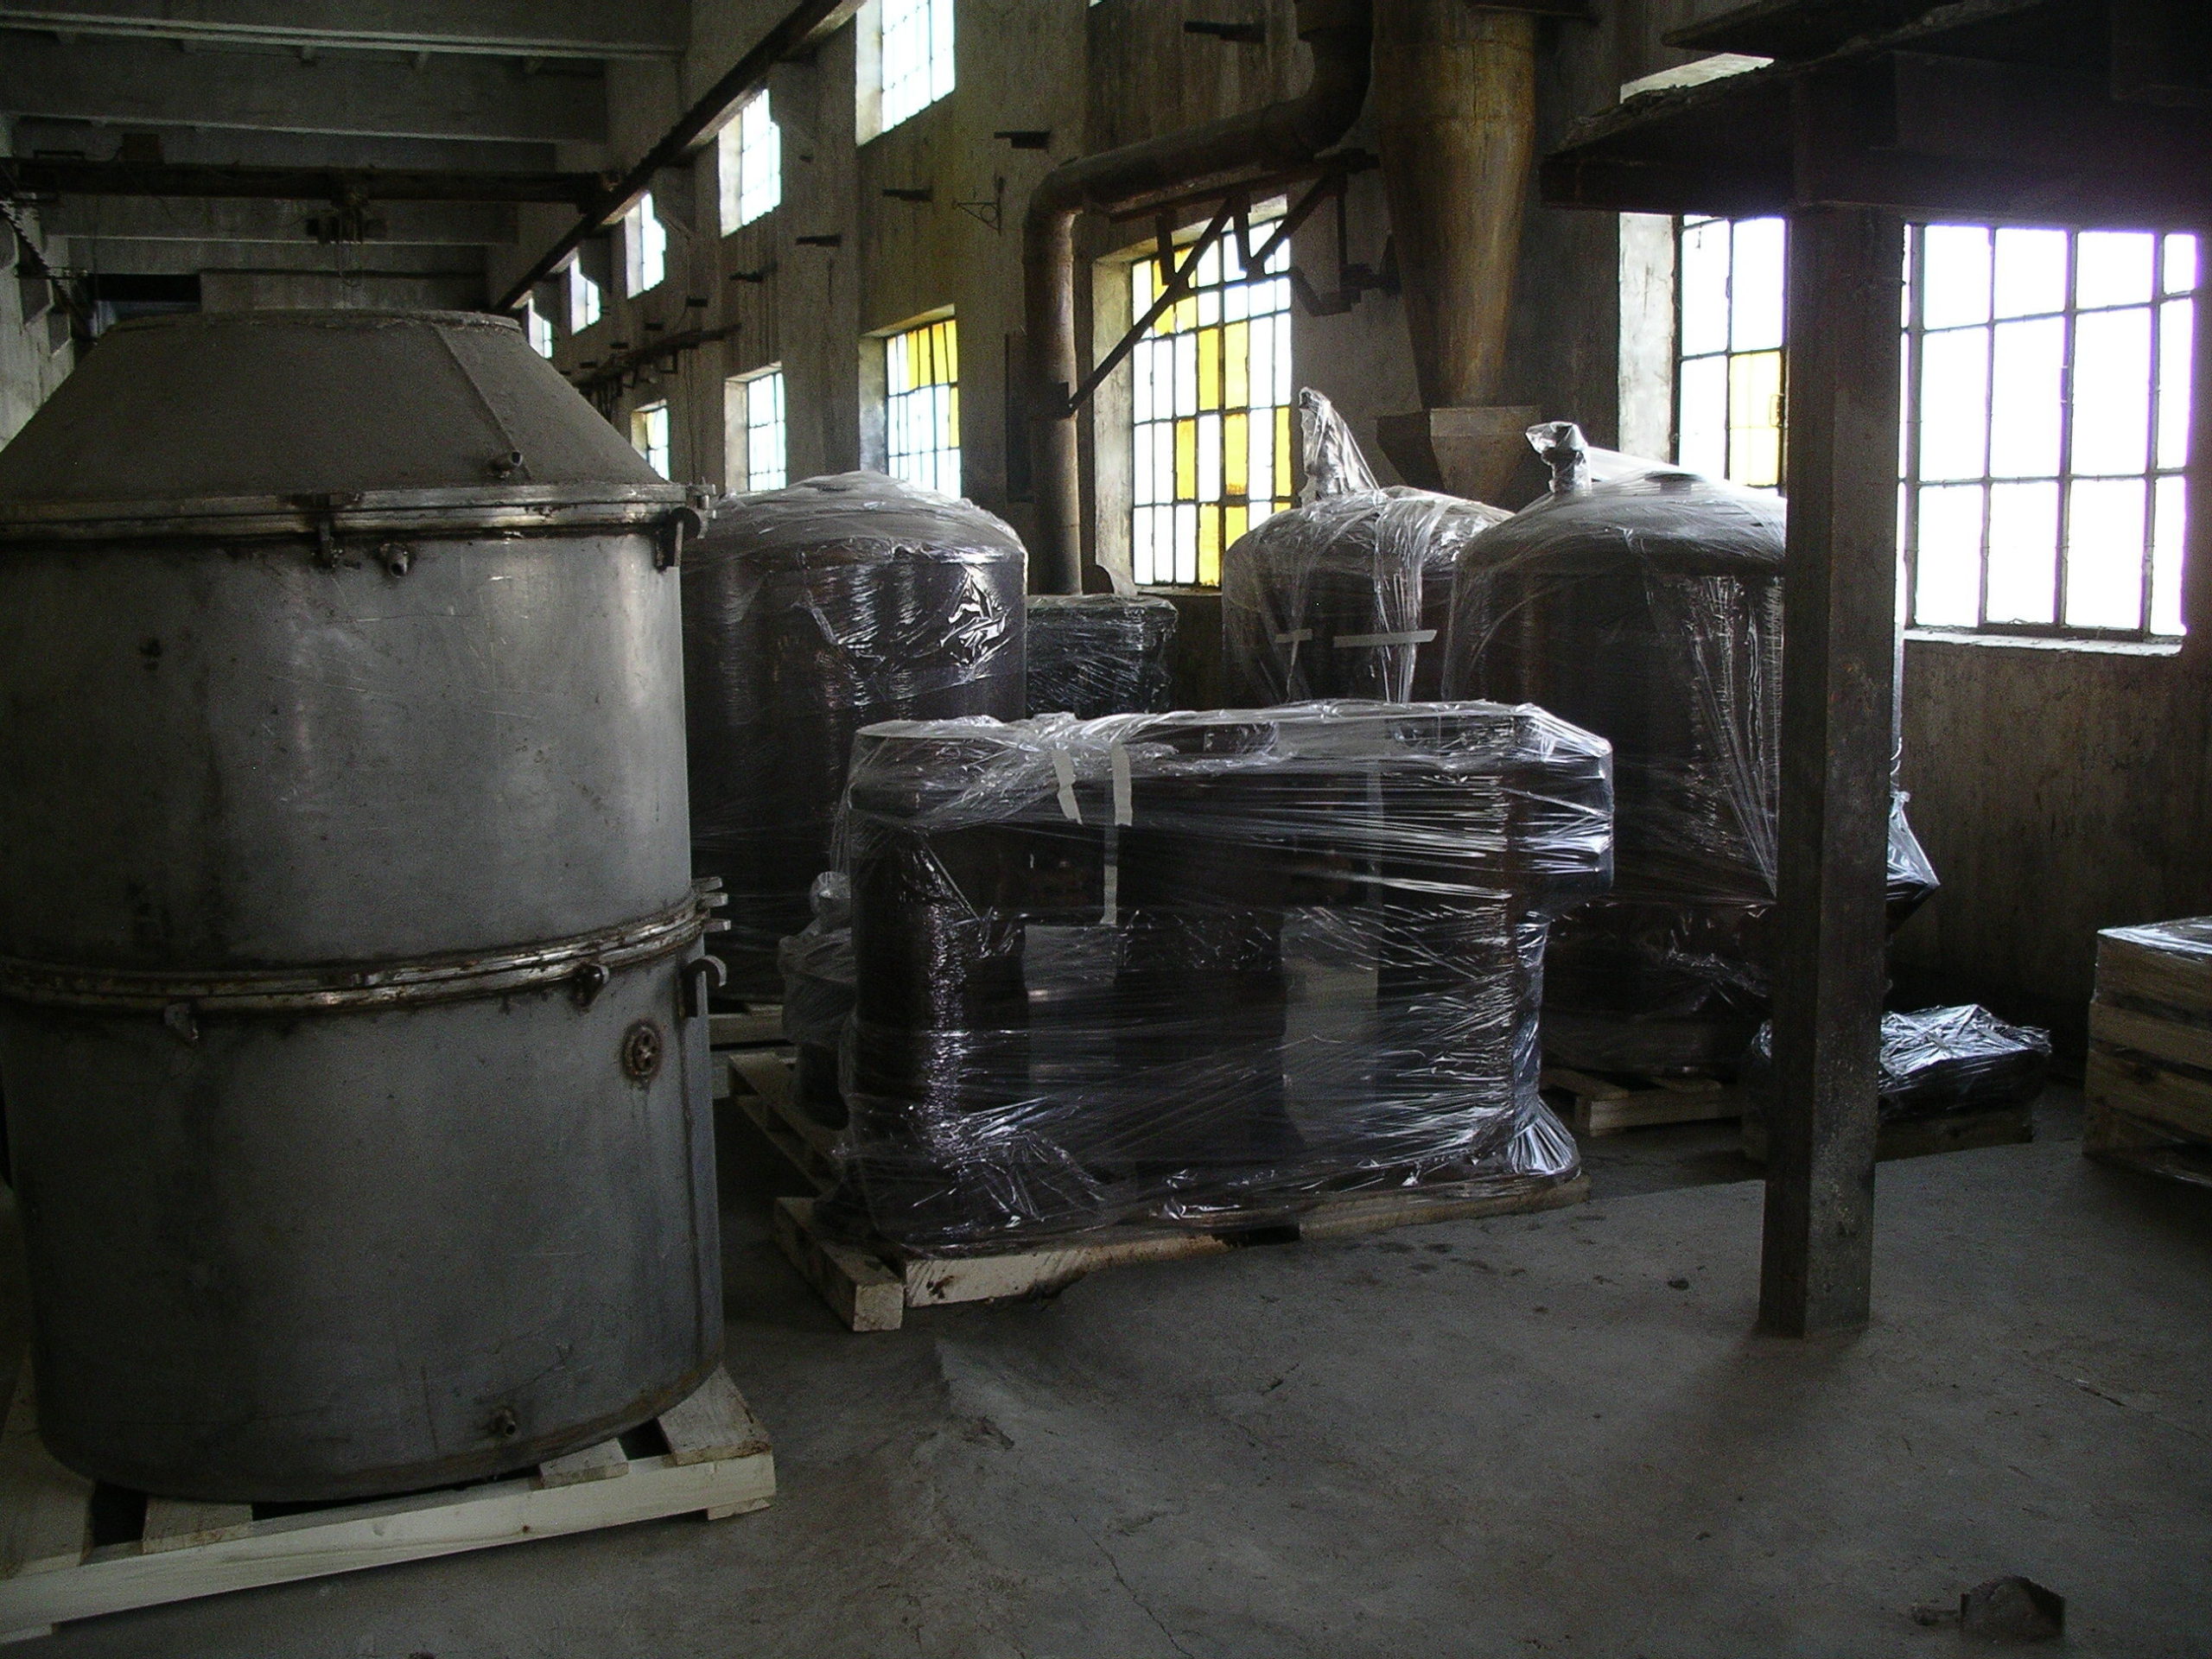 Heavy tanks and metal equipment in plastic for storage